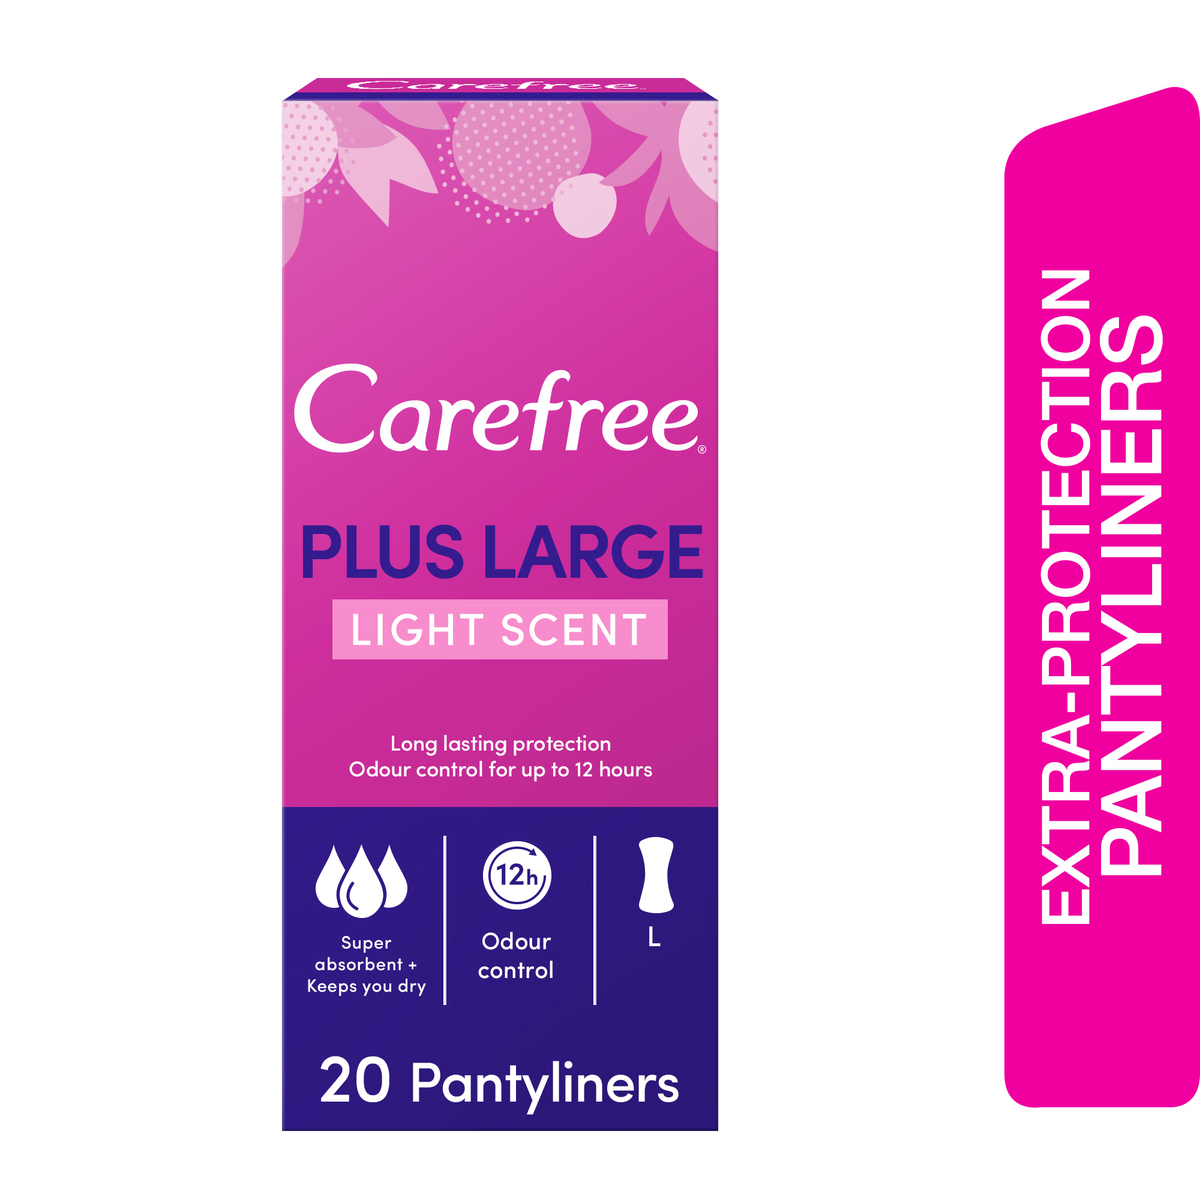 Buy Carefree Panty Liners Plus Large Light Scent 20pcs Online at Best Price | Sanpro Panty Liners | Lulu Kuwait in Saudi Arabia